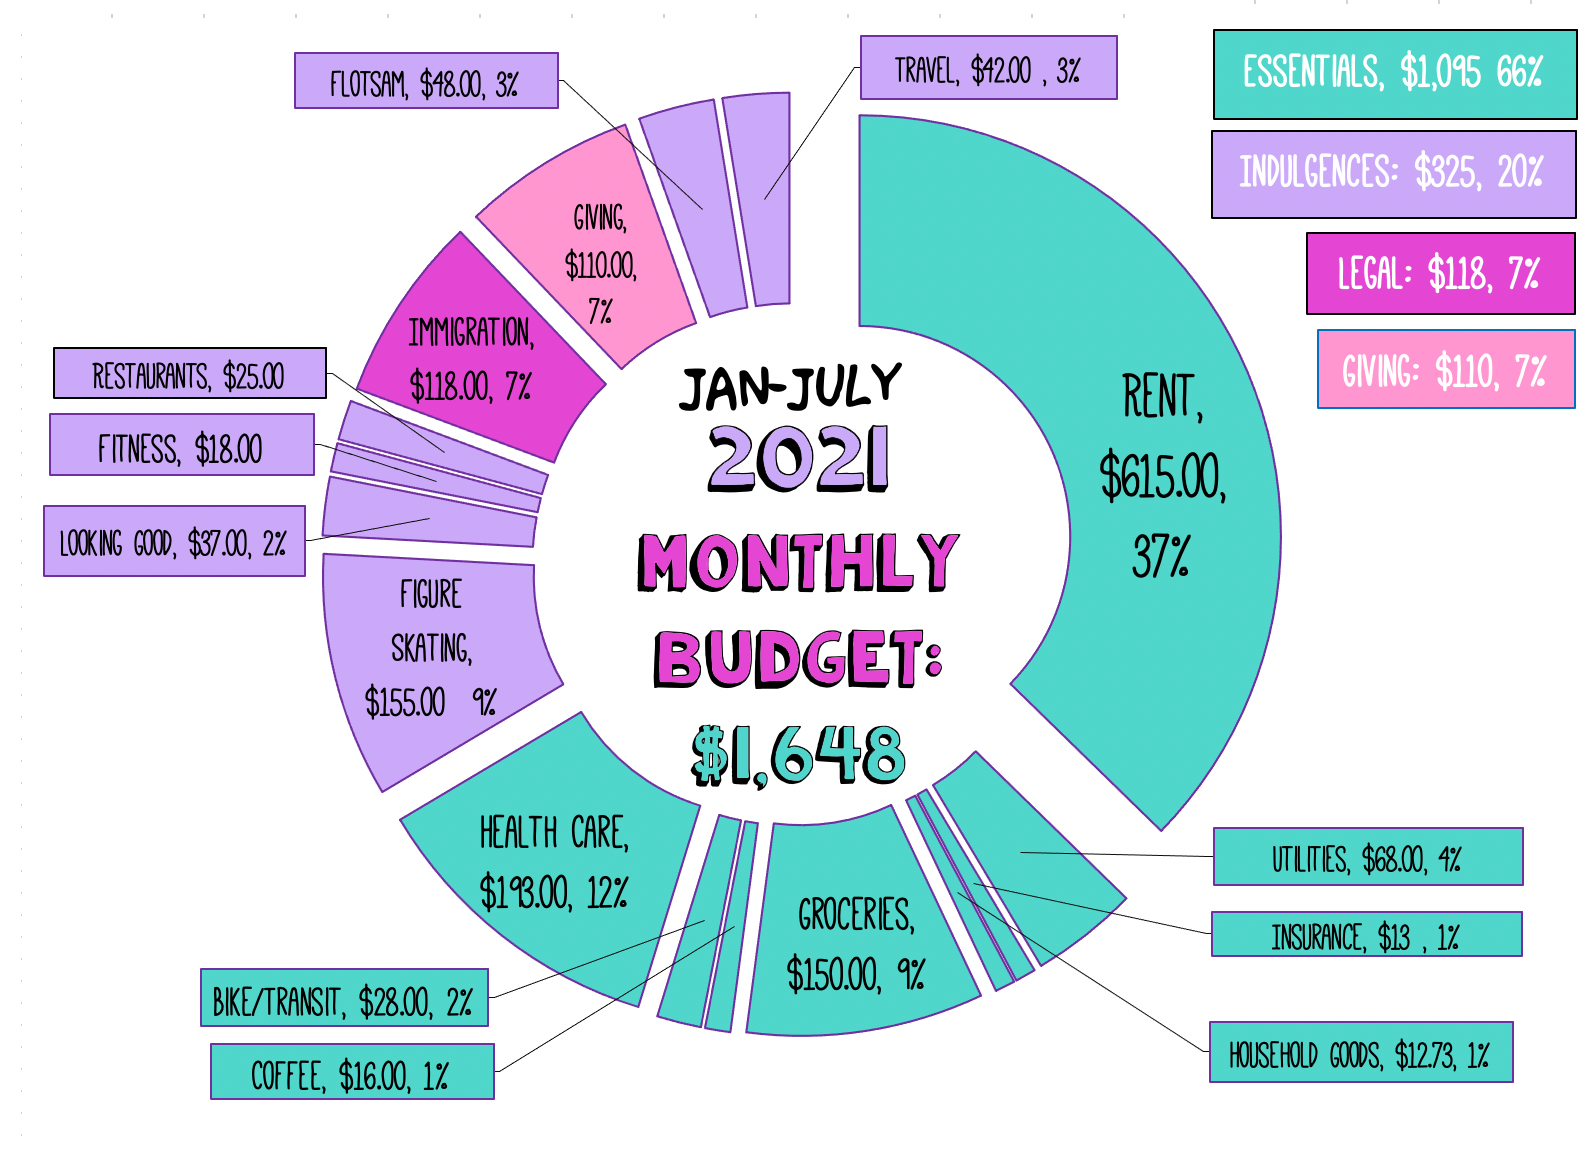 A donut chart displays the monthly budget for January through July 2021 as described below